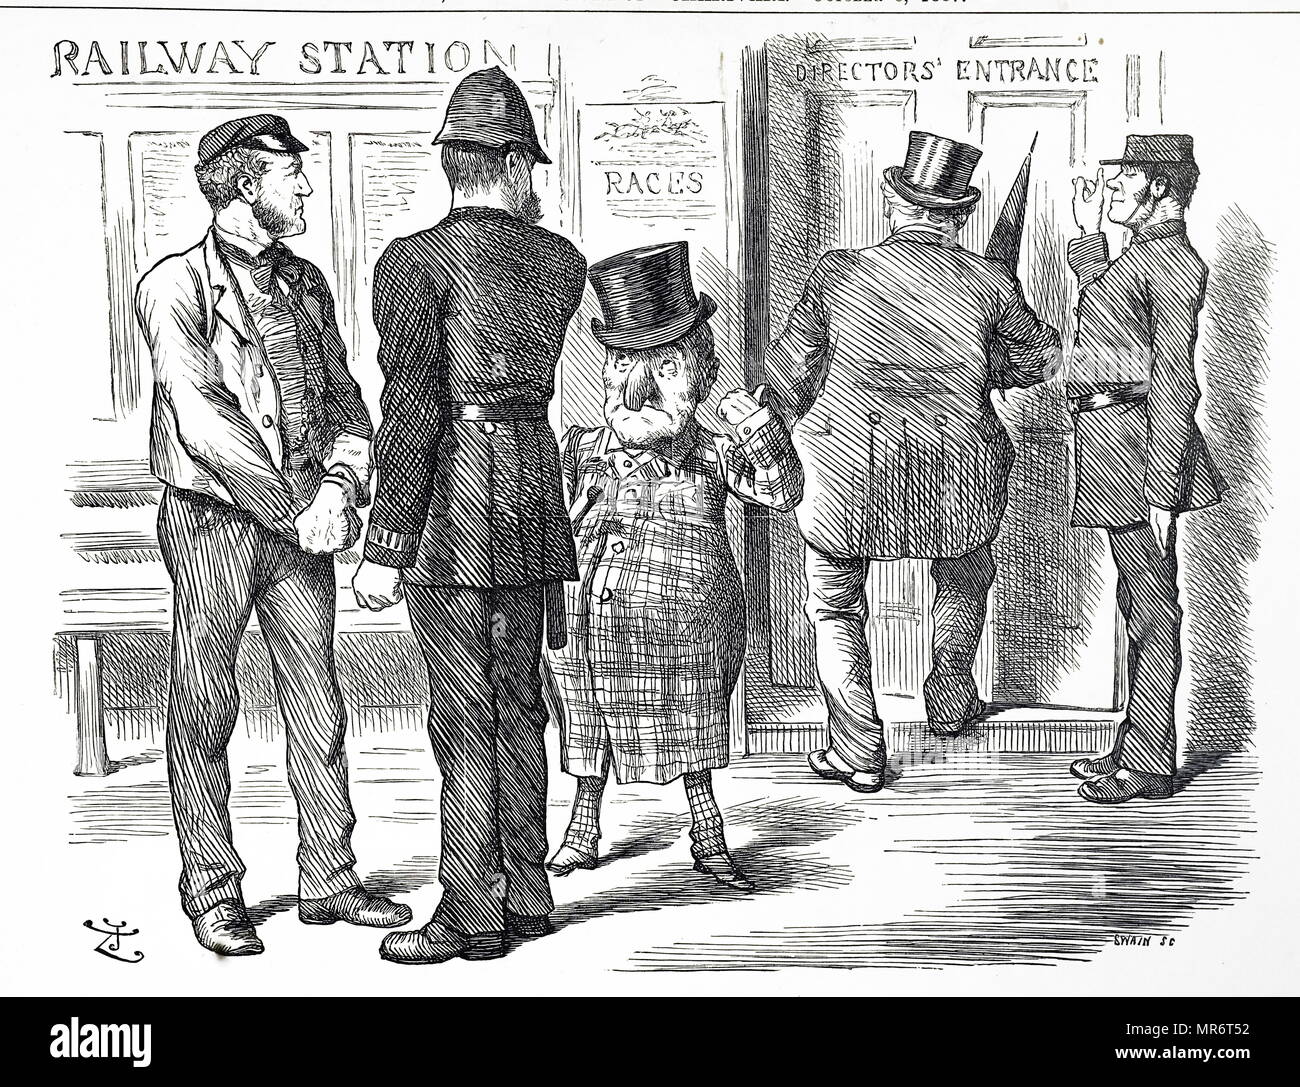 Cartoon commenting on the pleas for a block system signal to be made compulsory on British Railways. Illustrated by John Tenniel (1820-1914) an English illustrator, graphic humourist, and political cartoonist. Dated 19th century Stock Photo